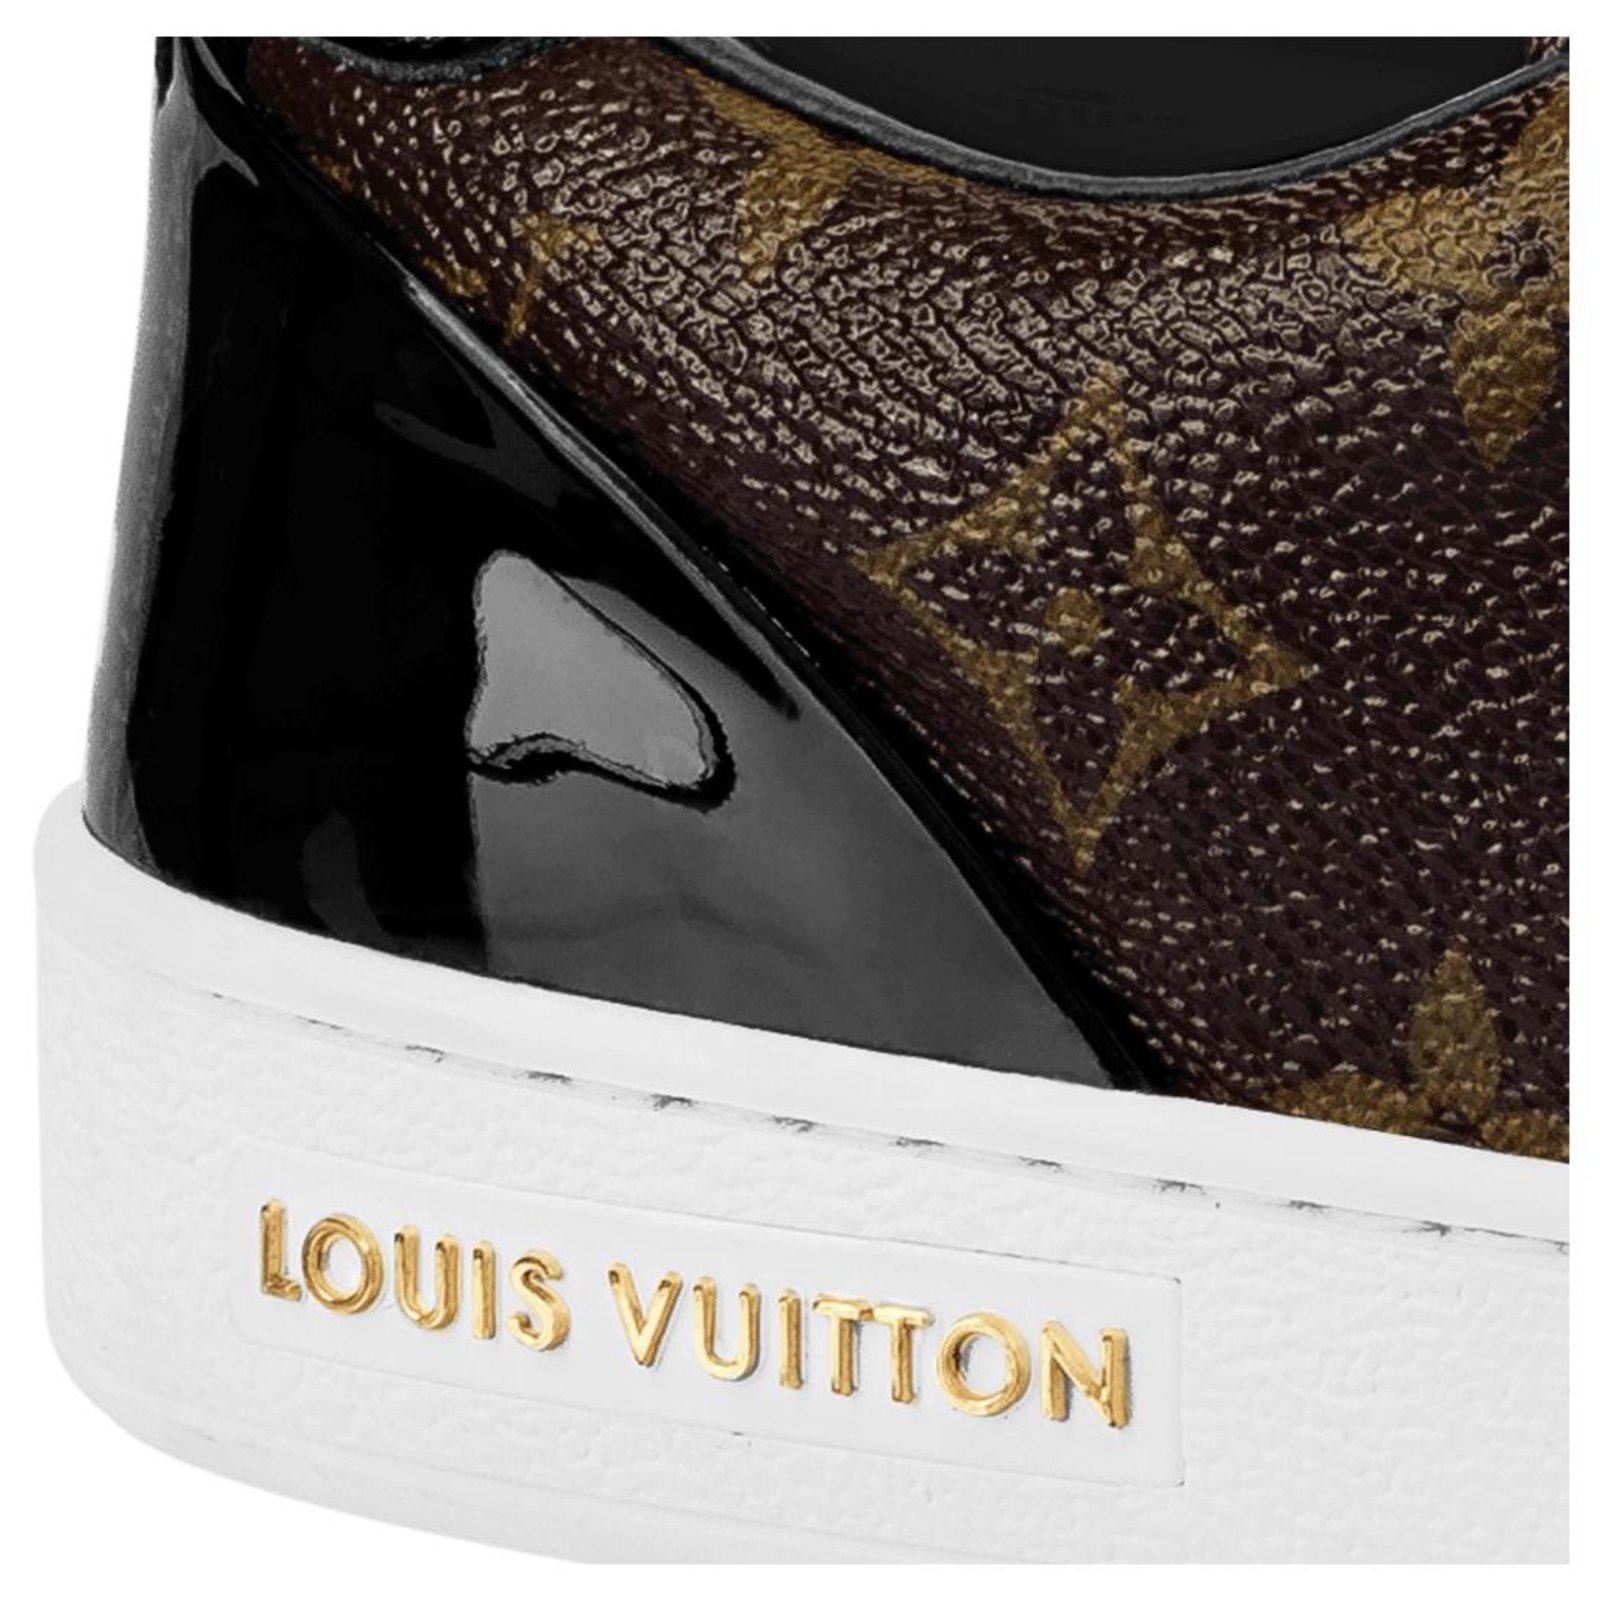 Louis Vuitton - Authenticated FRONTROW Trainer - Patent Leather Black Plain for Women, Very Good Condition